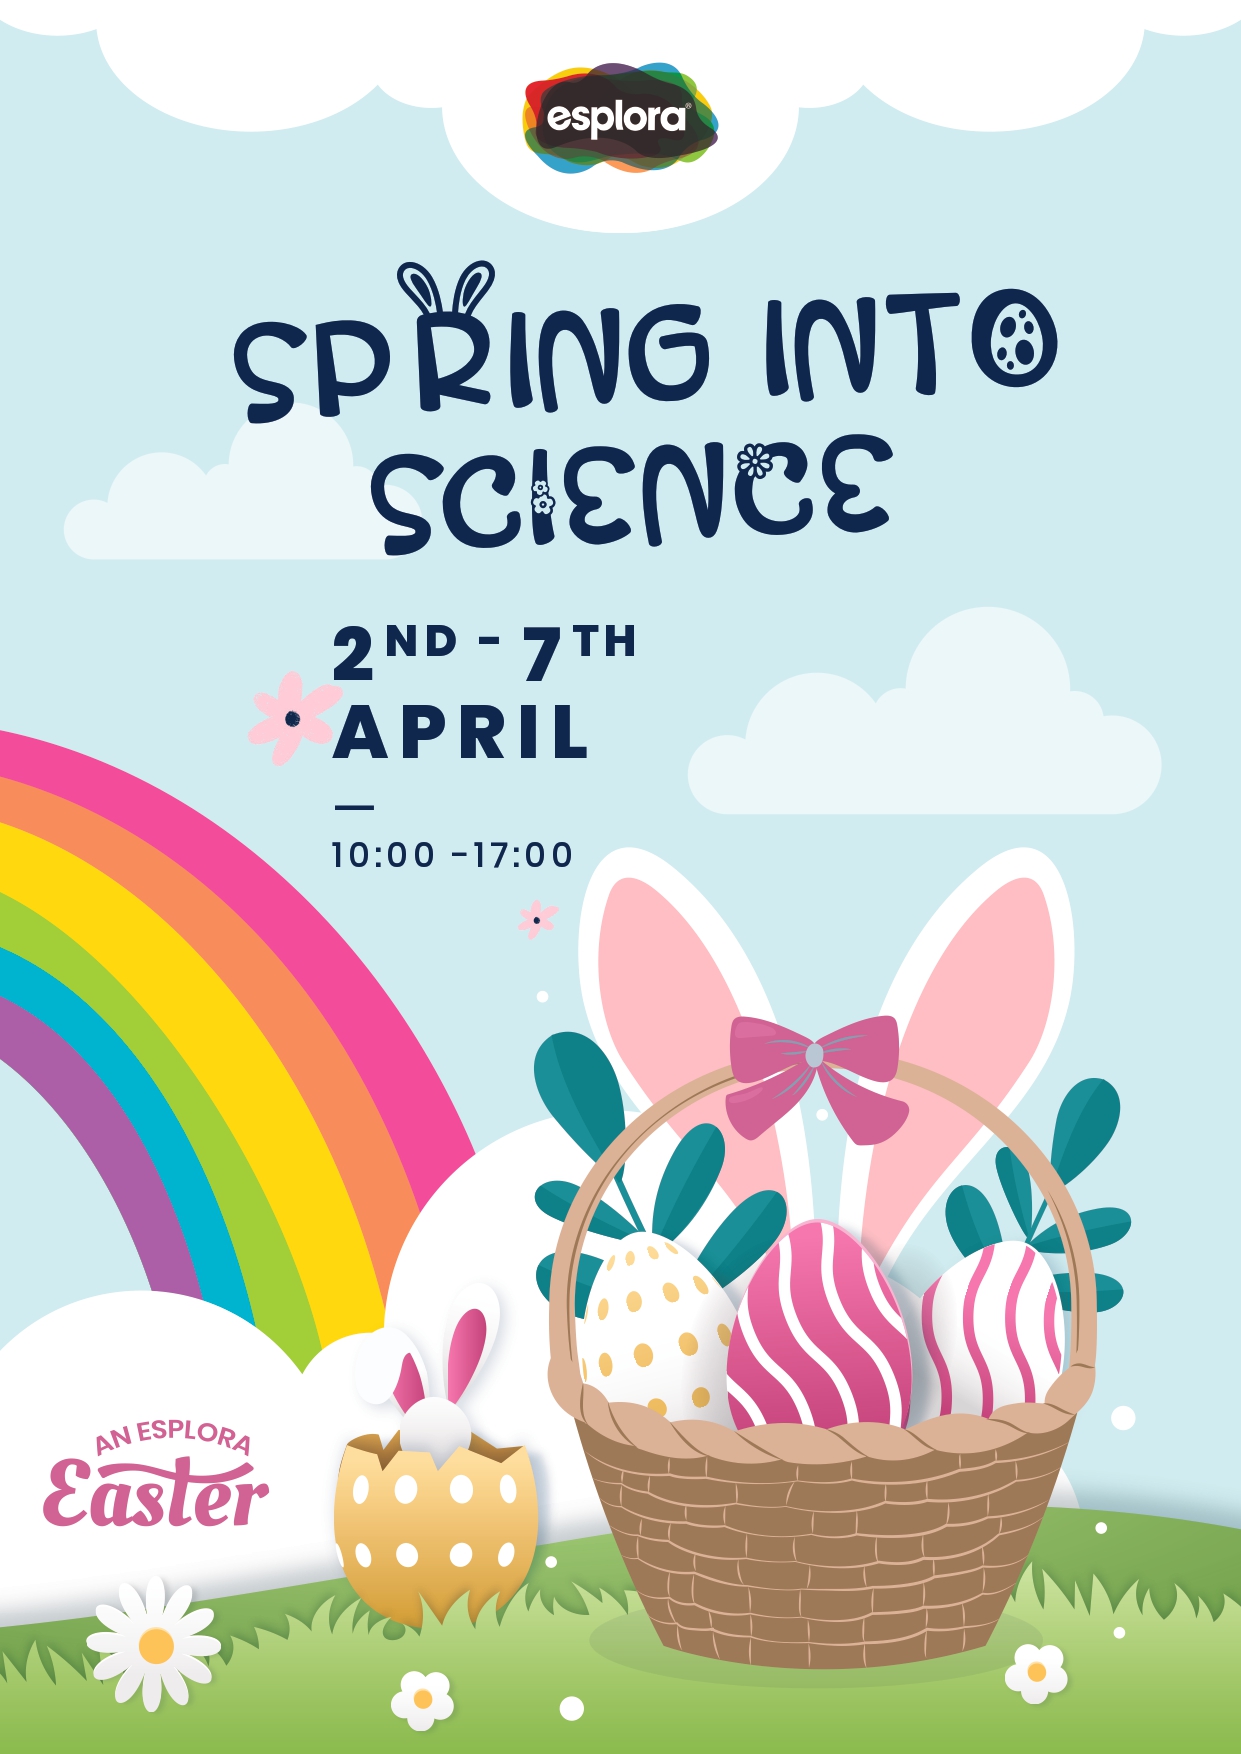 Spring into Science - Easter at Esplora poster